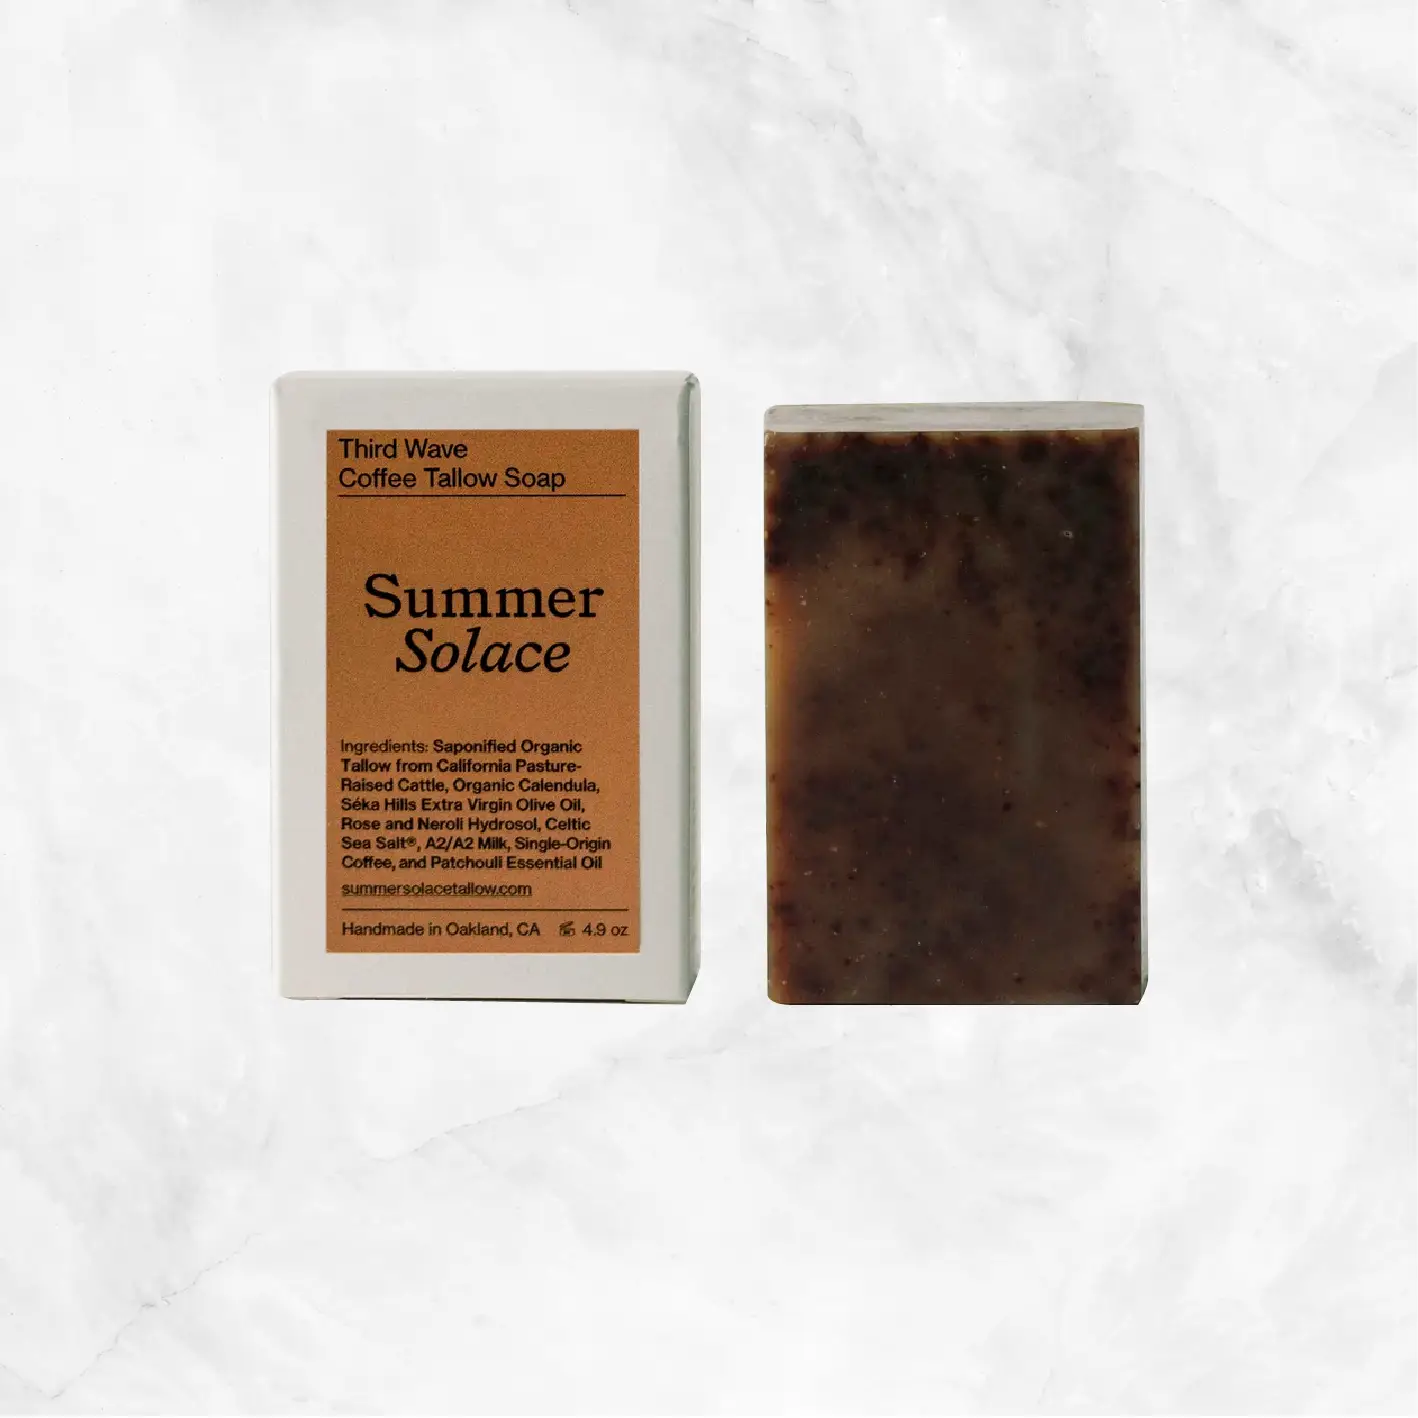 Third Wave Coffee Tallow Bar Soap Delivery